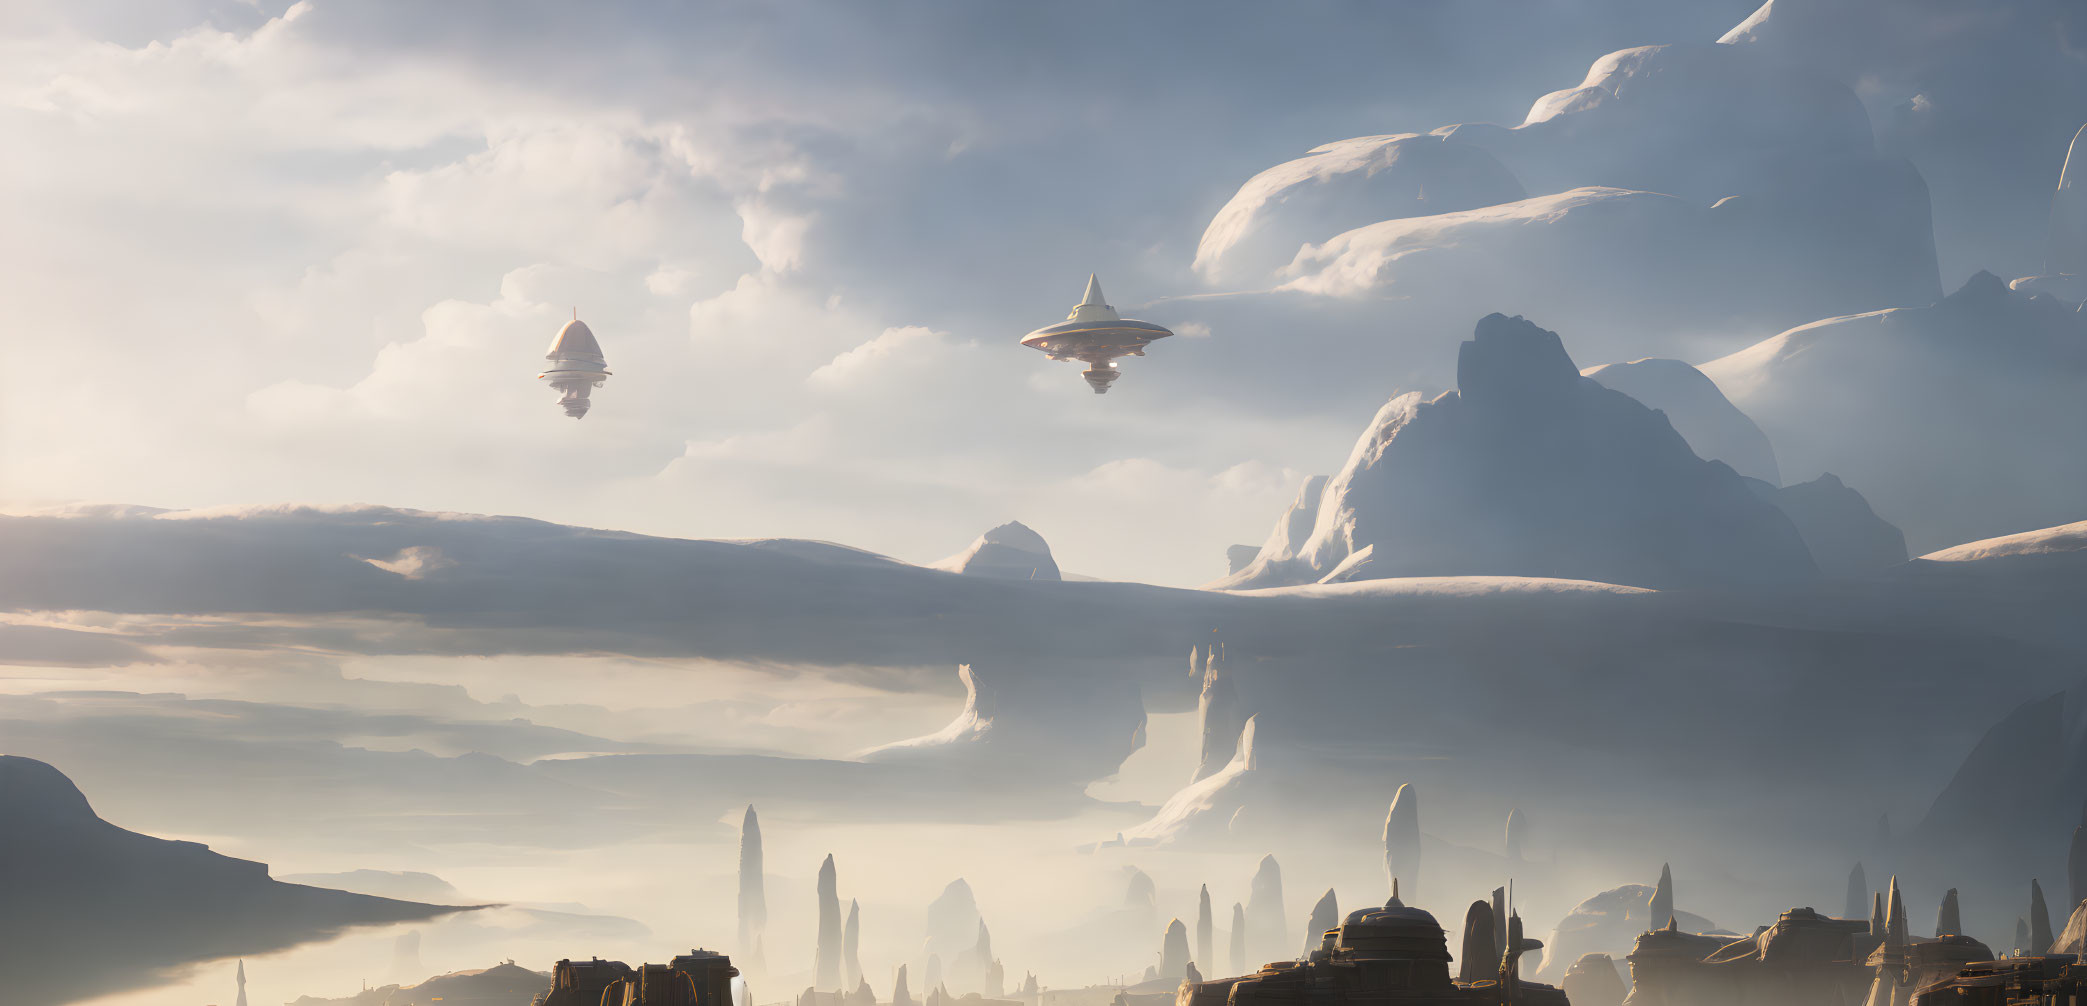 Ethereal landscape with floating cities above mist-covered rock formations